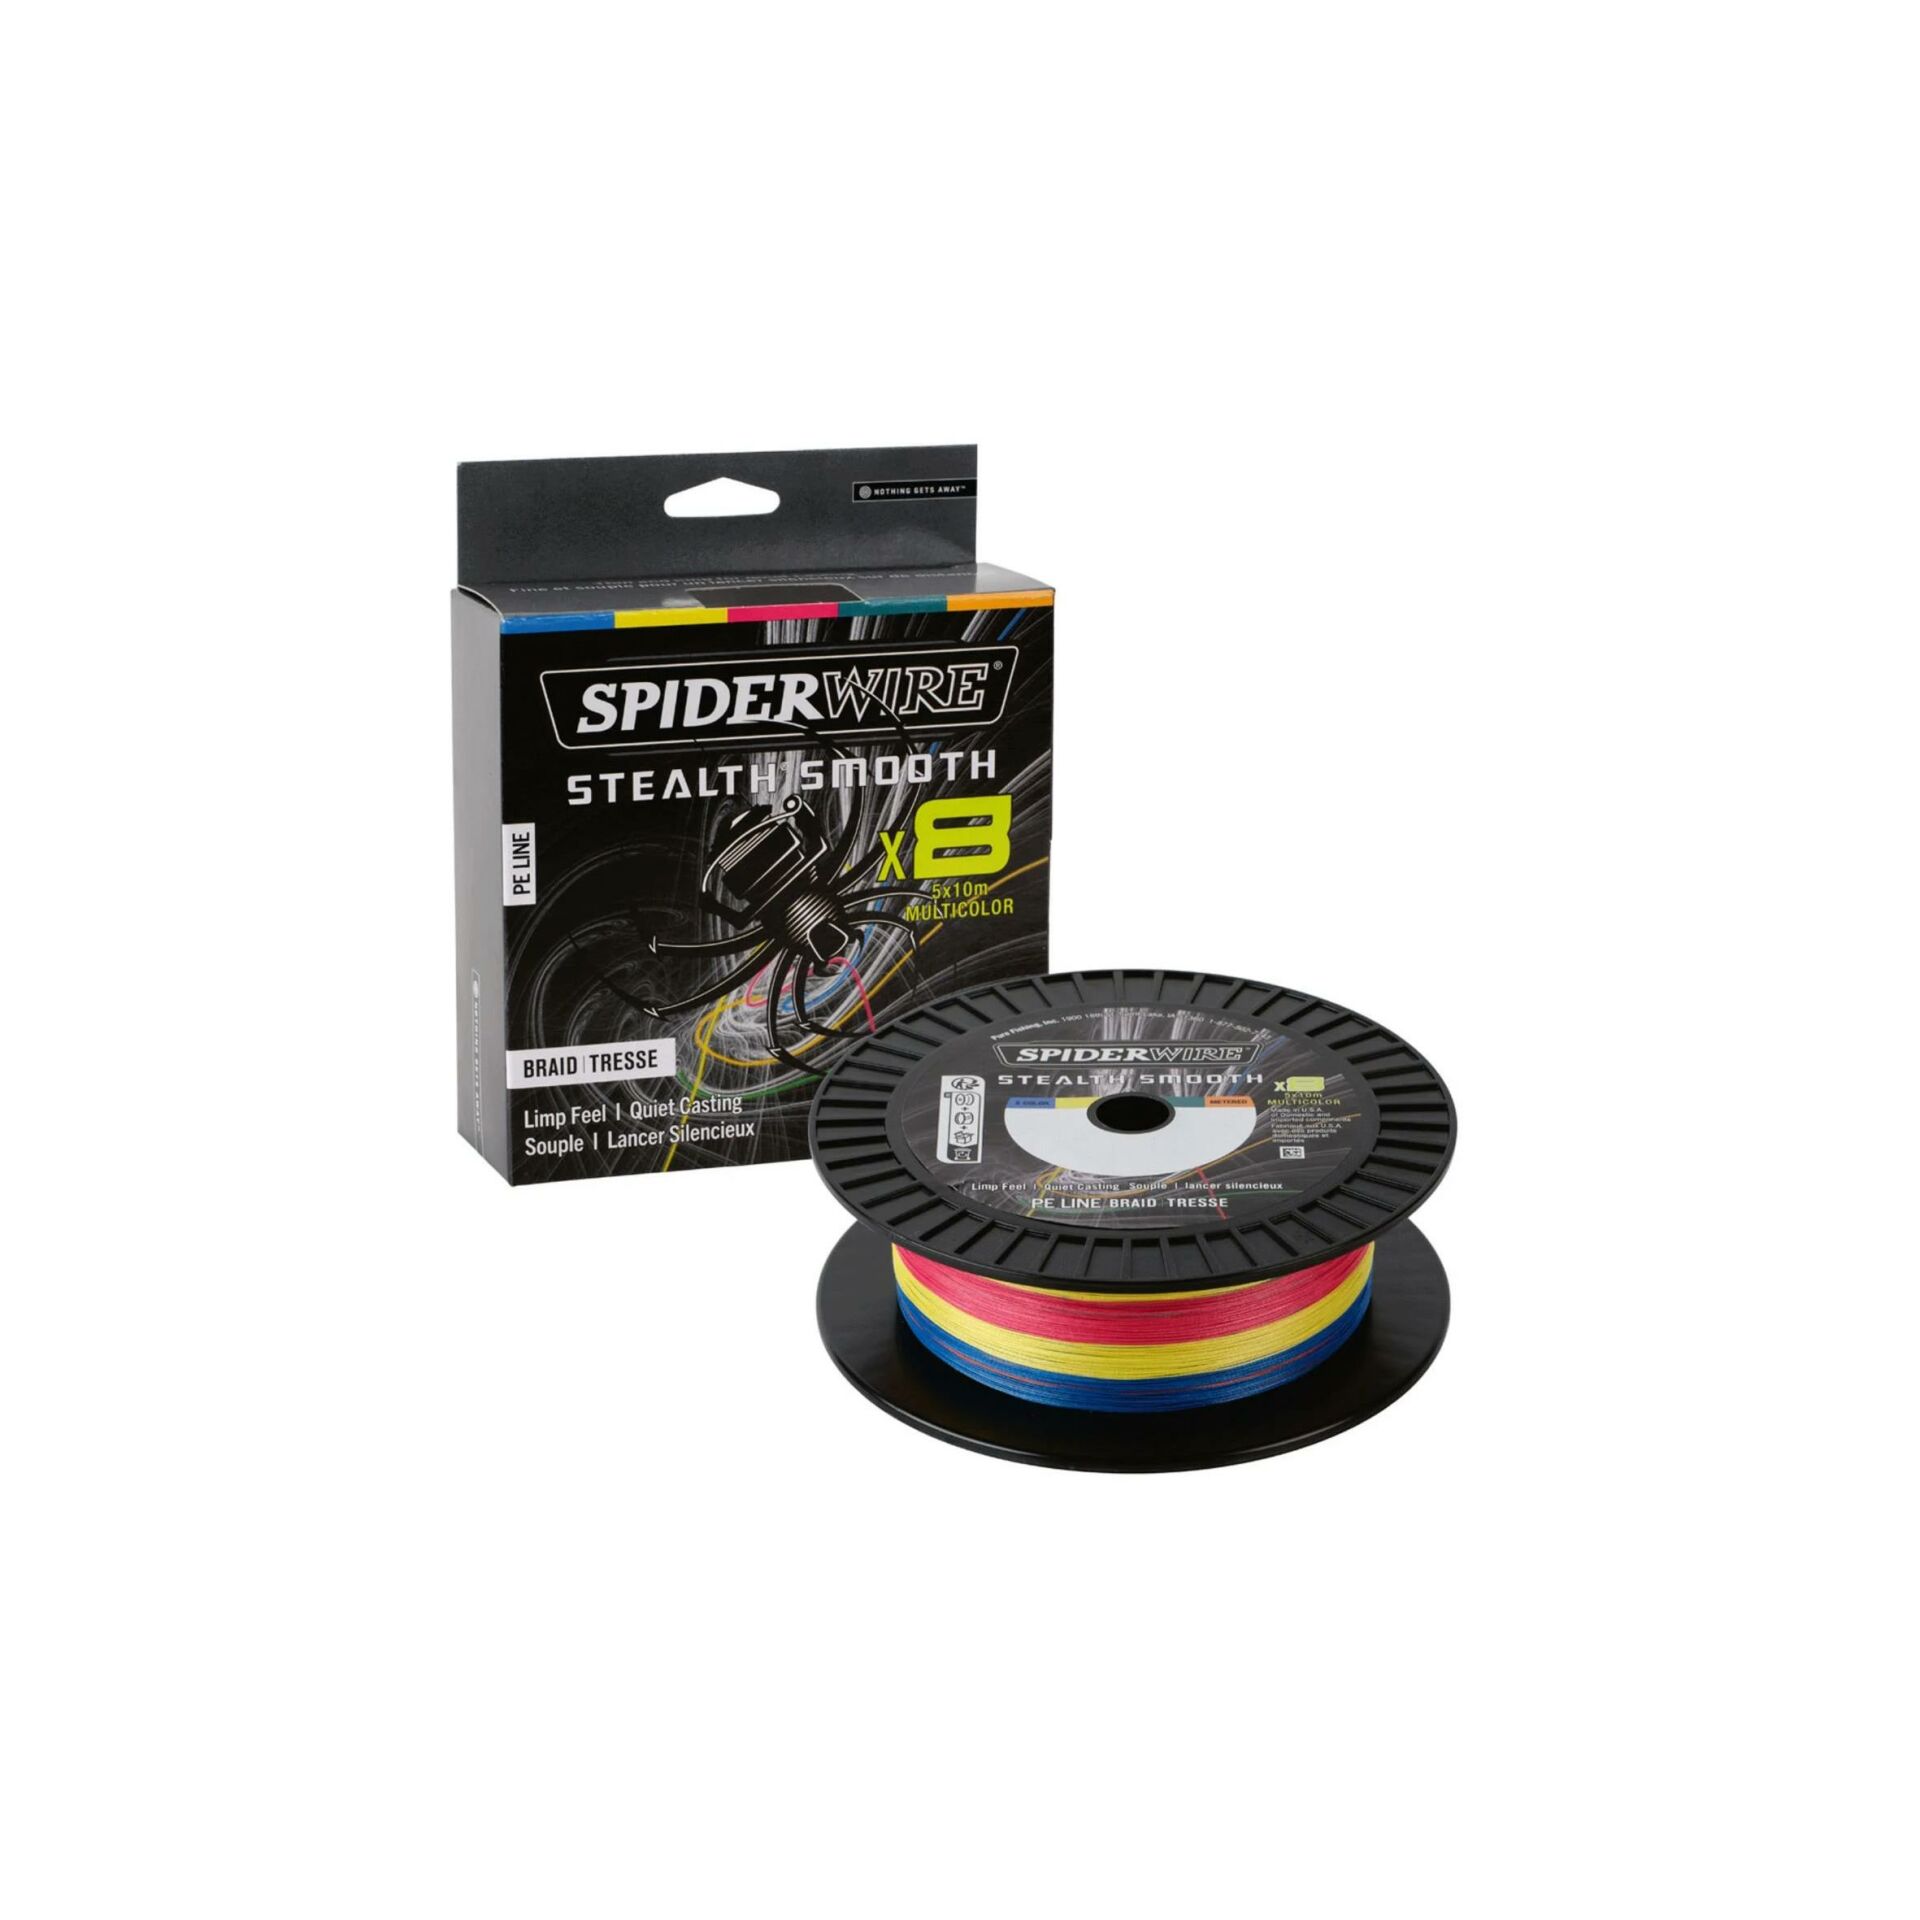 Spider Wire Stealth Smooth x8 300 m Multicolour 0.23mm